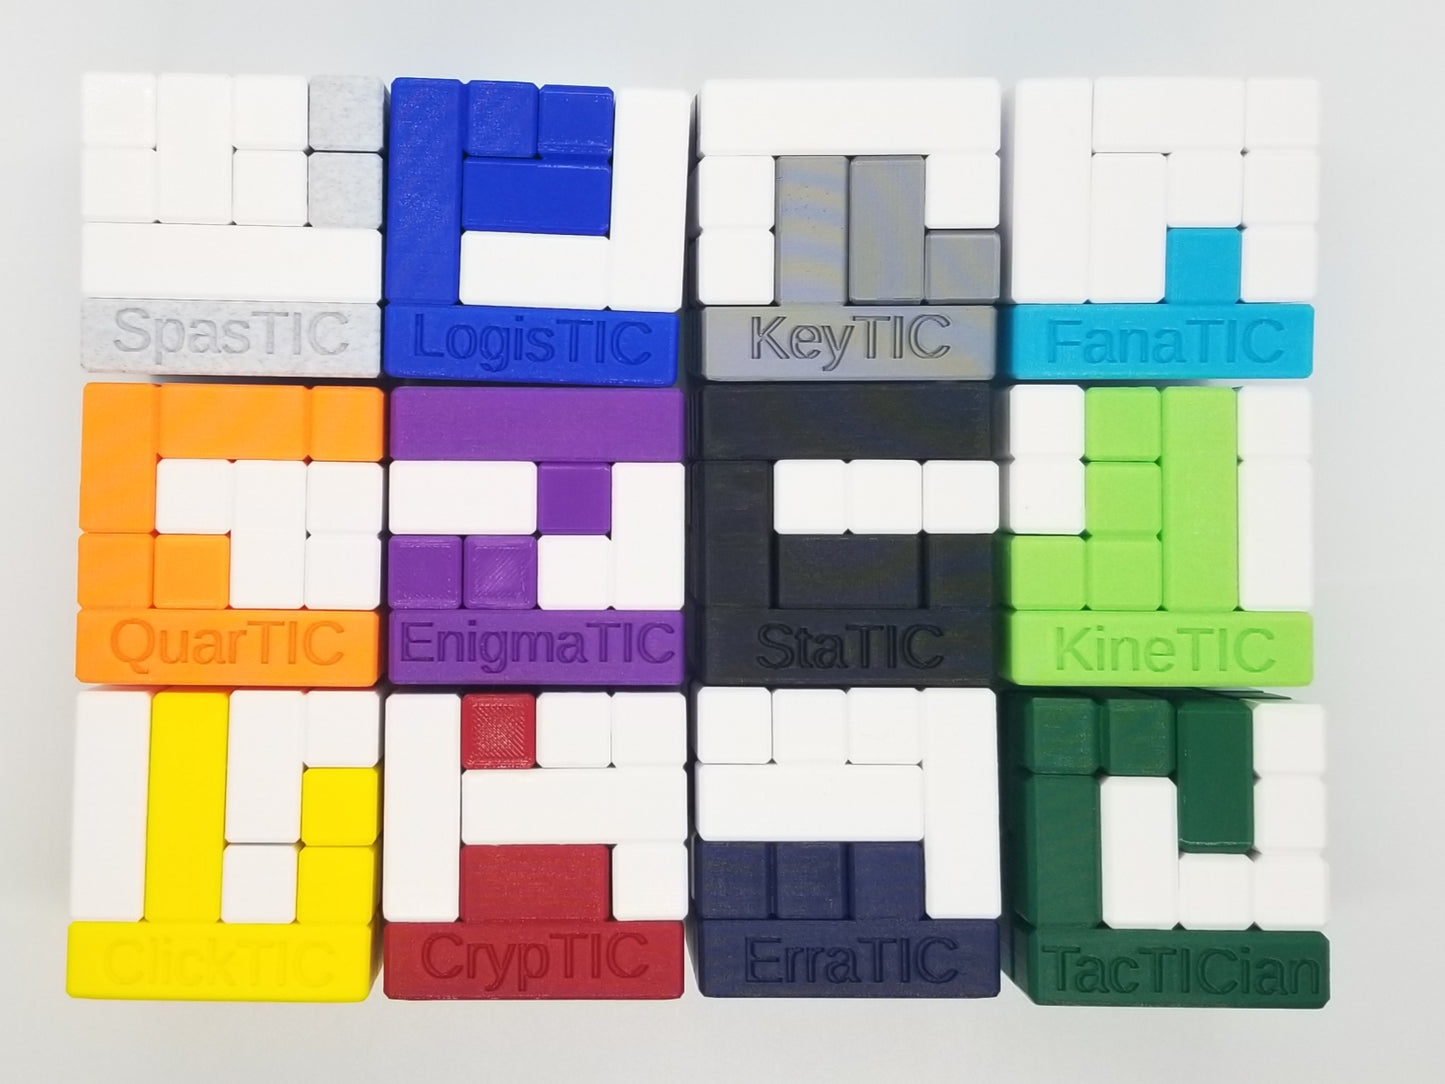 Download 3D Printable STL Files for Volume 2 of the 6 Piece Turning Interlocking Cube Puzzles